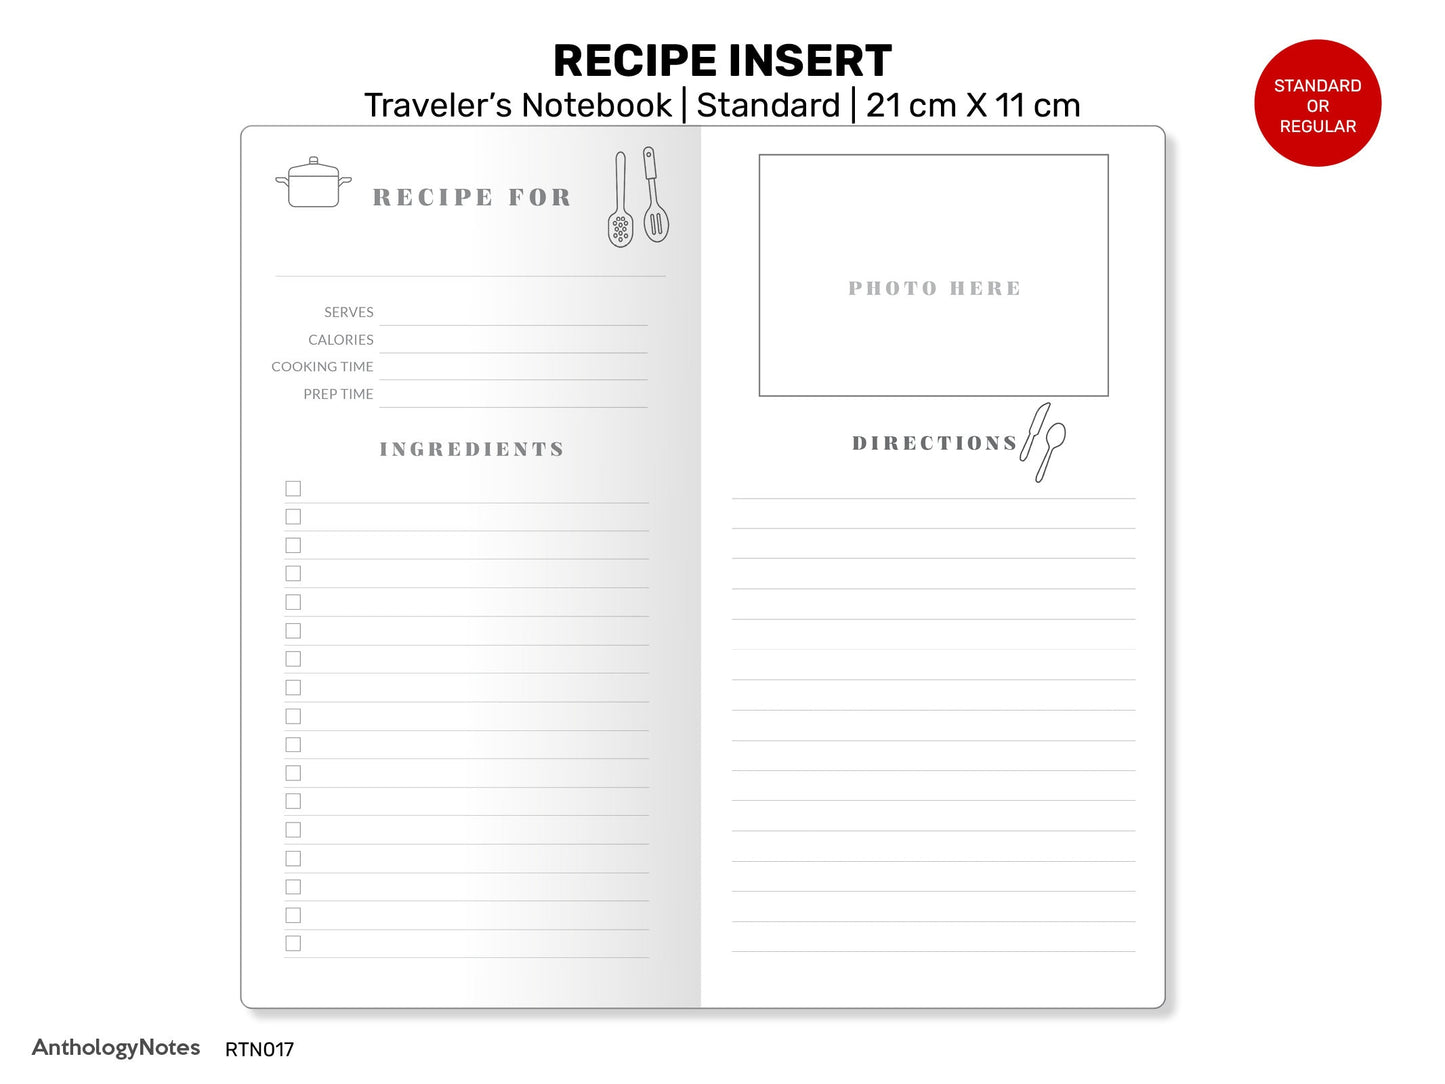 RECIPE Organizer Printable Insert Traveler's Notebook Standard Size With Cooking Measurement Conversion